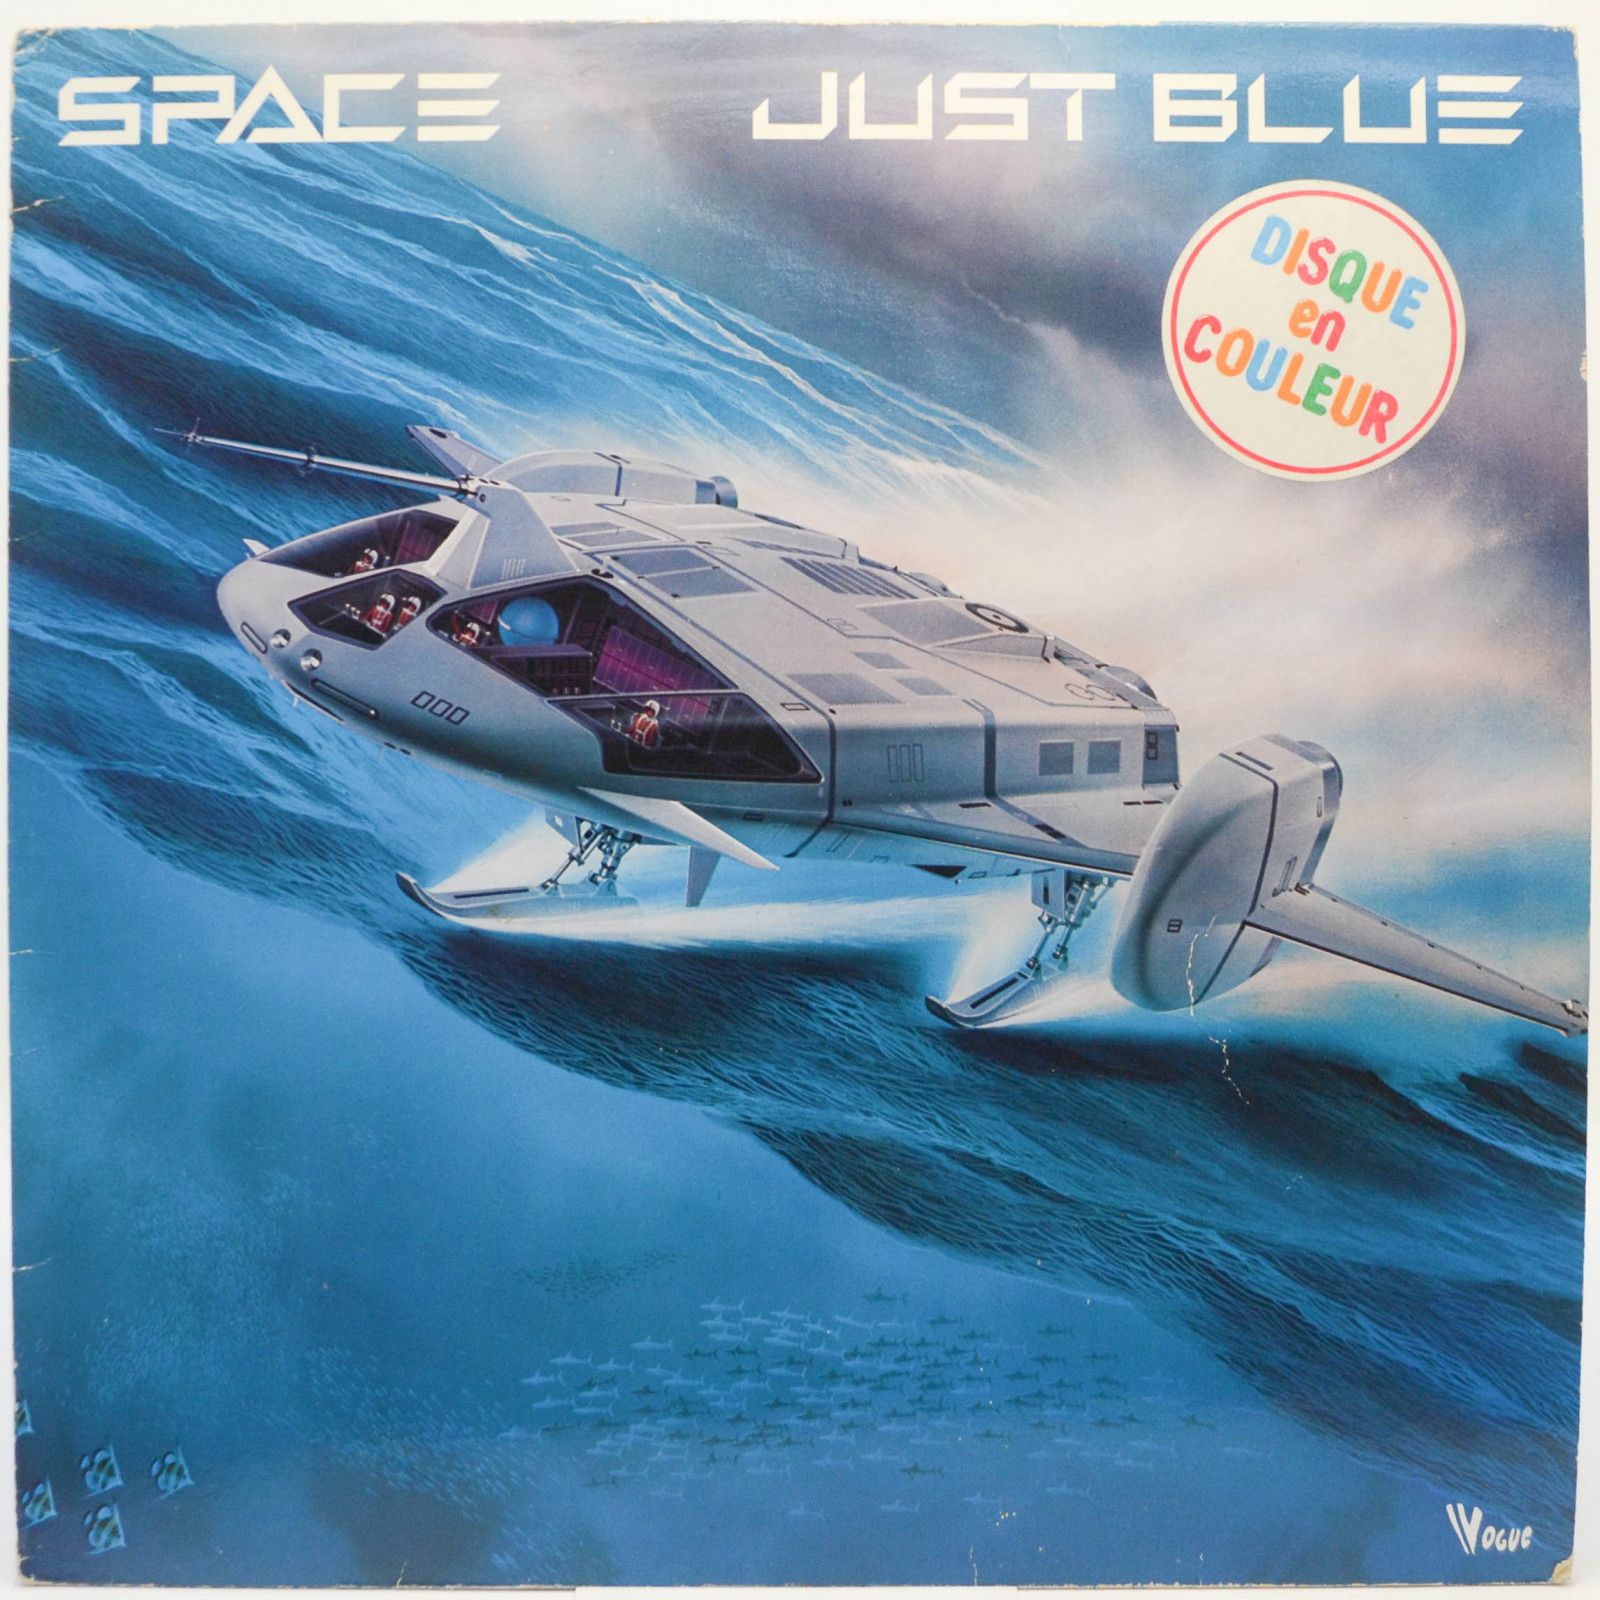 Space — Just Blue (France), 1978